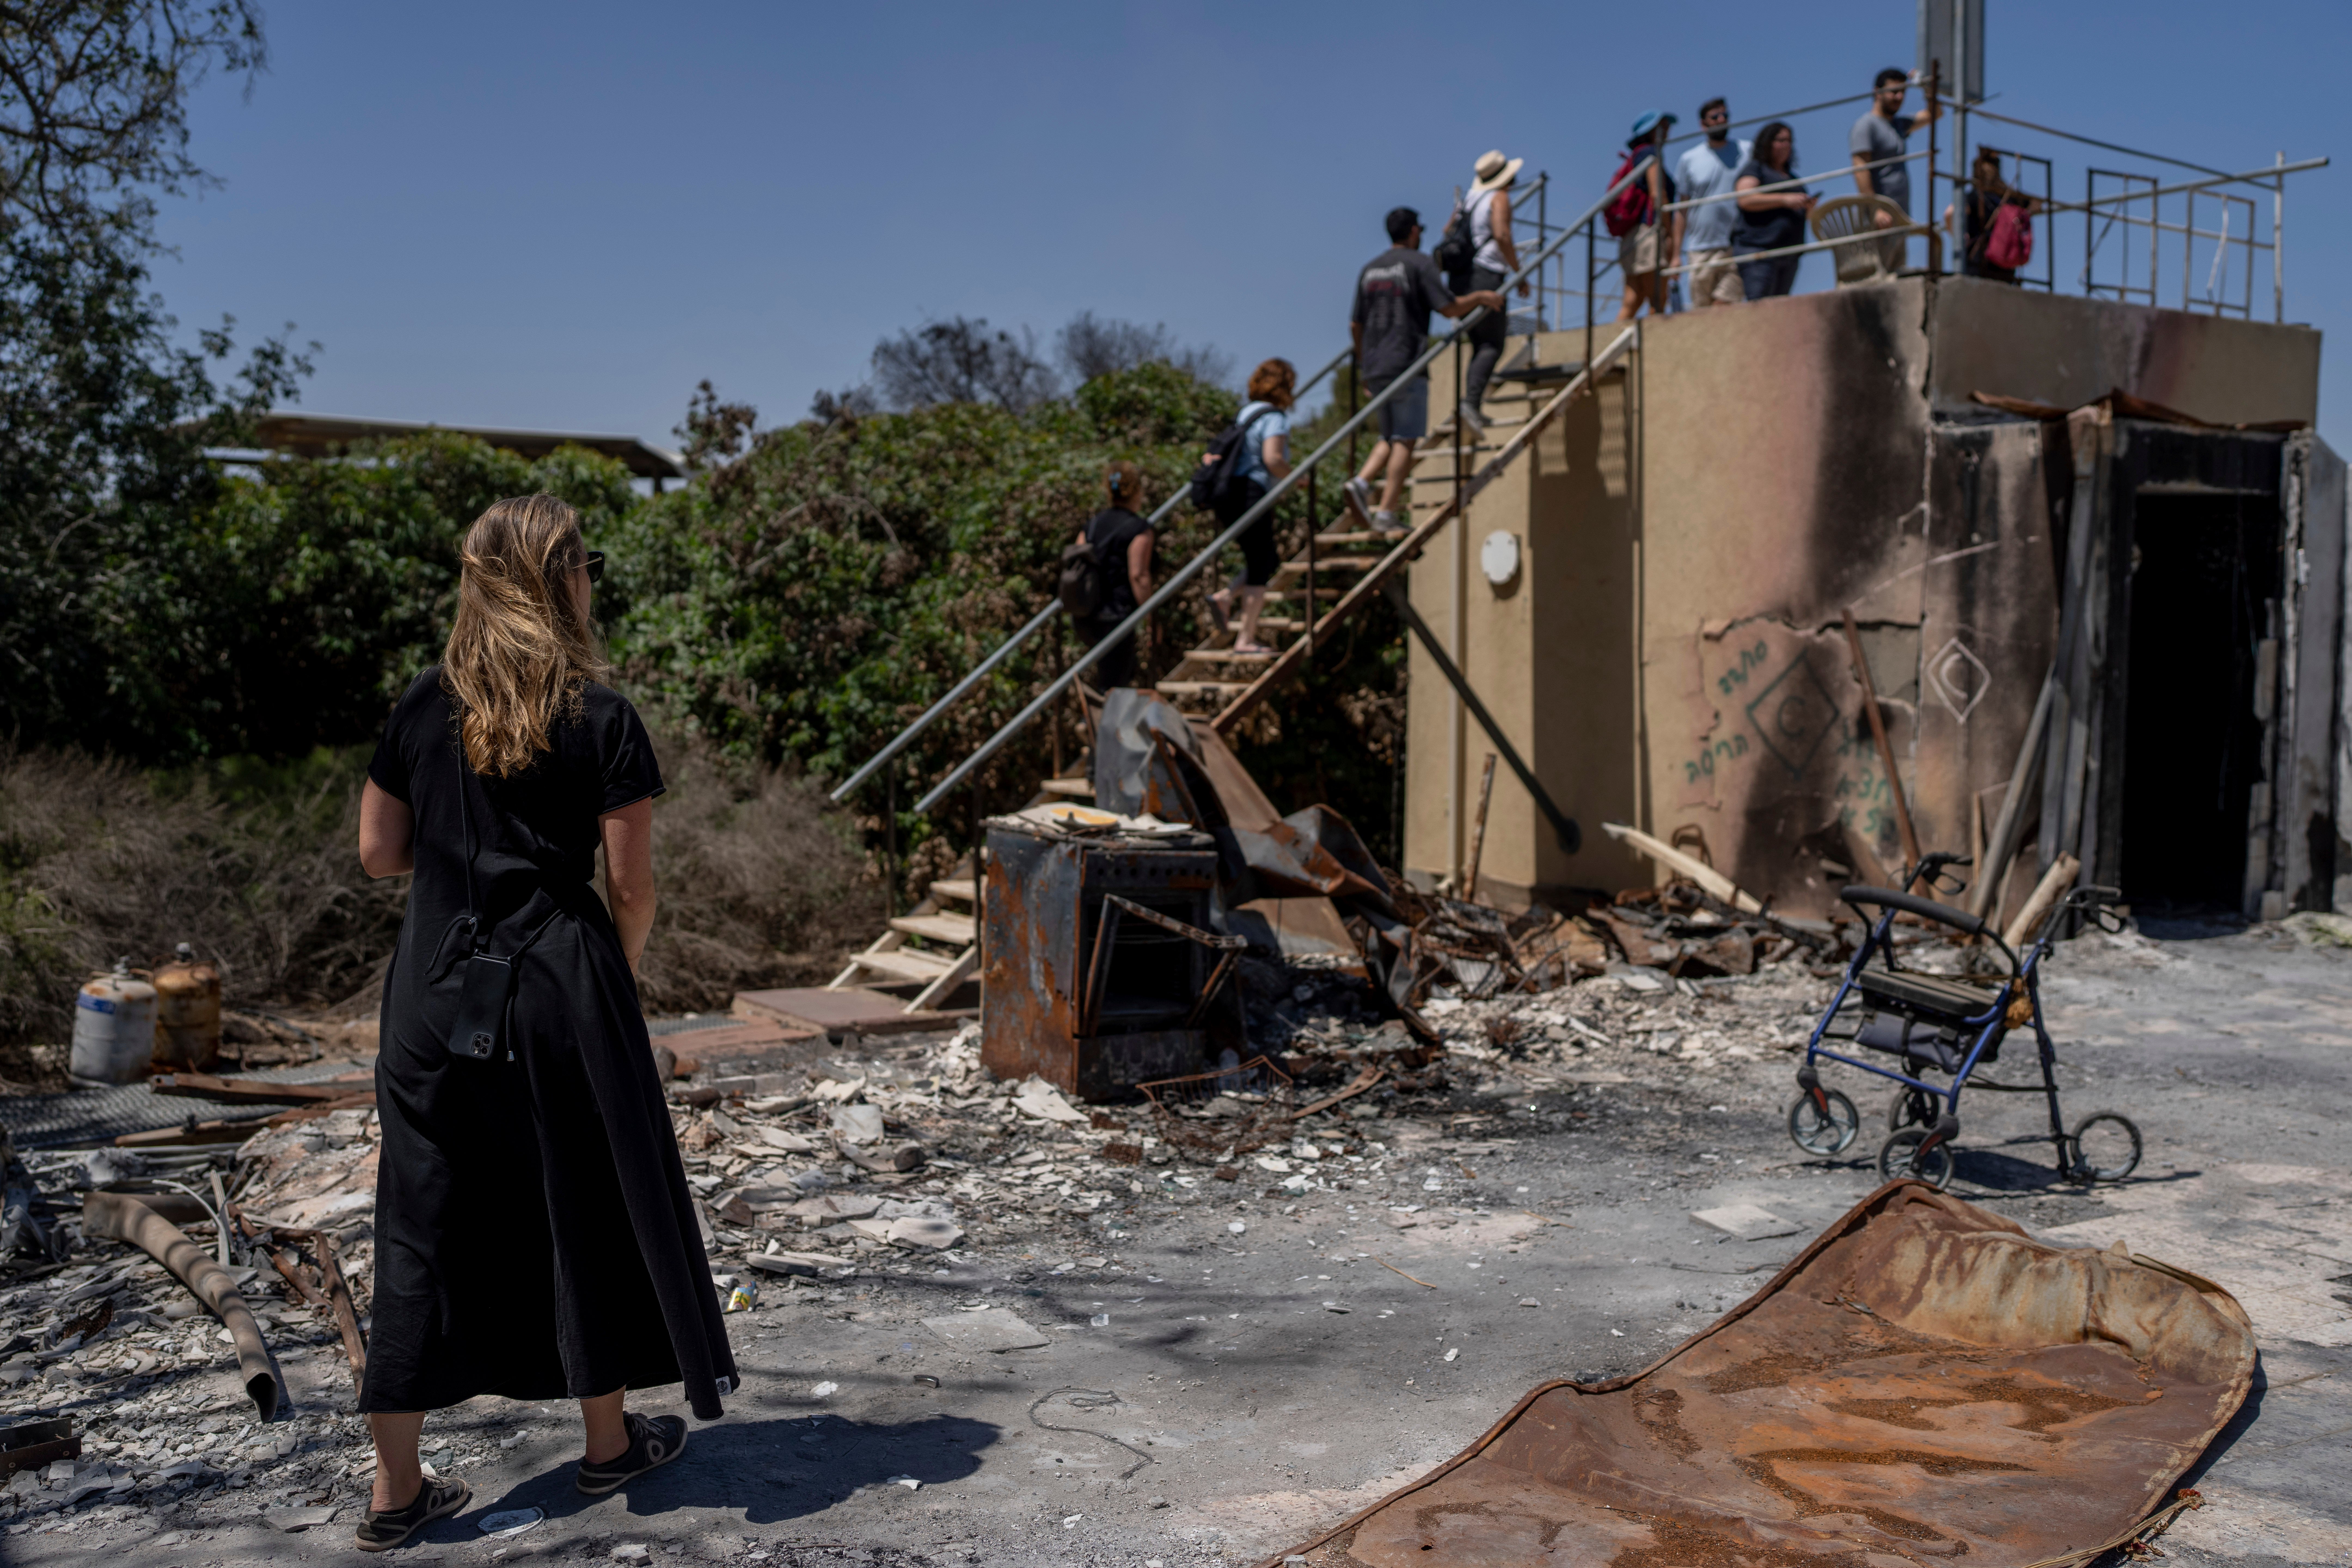 A group of Israelis on an educational tour visit a house that was torched by Hamas militants on the October 7 attack